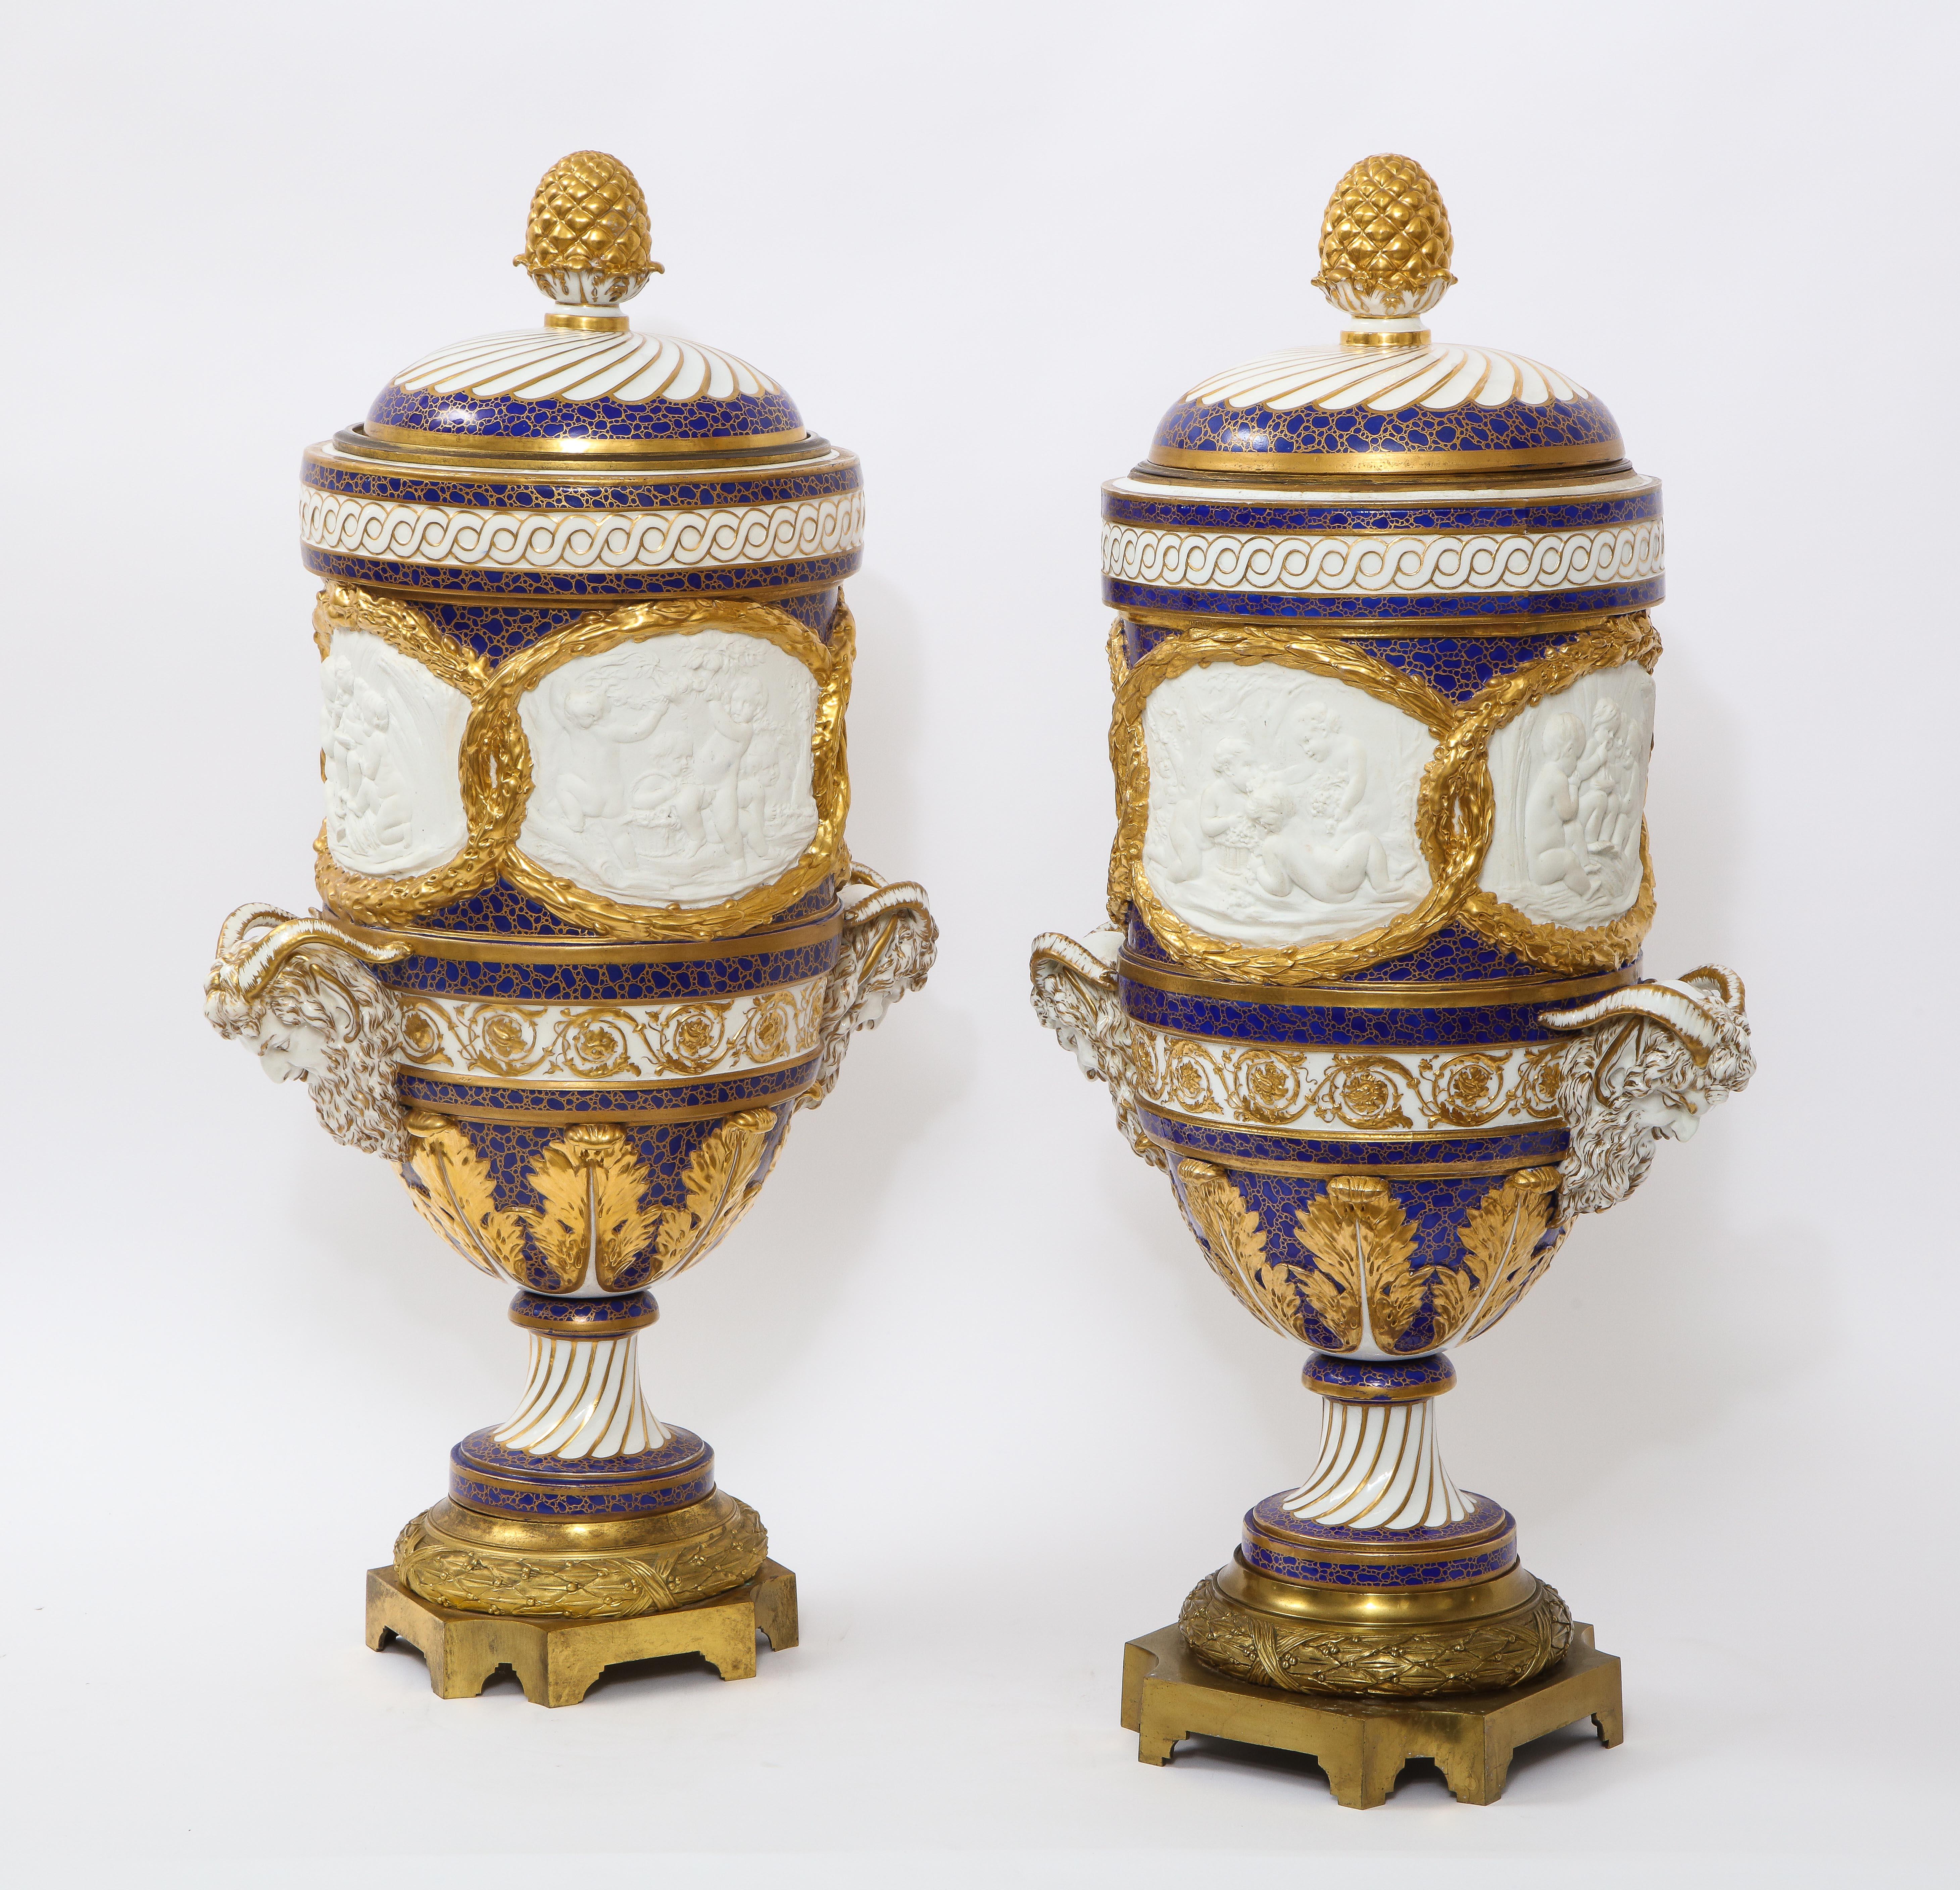 An elaborate and monumental pair of 19th century Ormolu Mounted French Sevres Porcelain and biscuit porcelain cobalt blue ground 